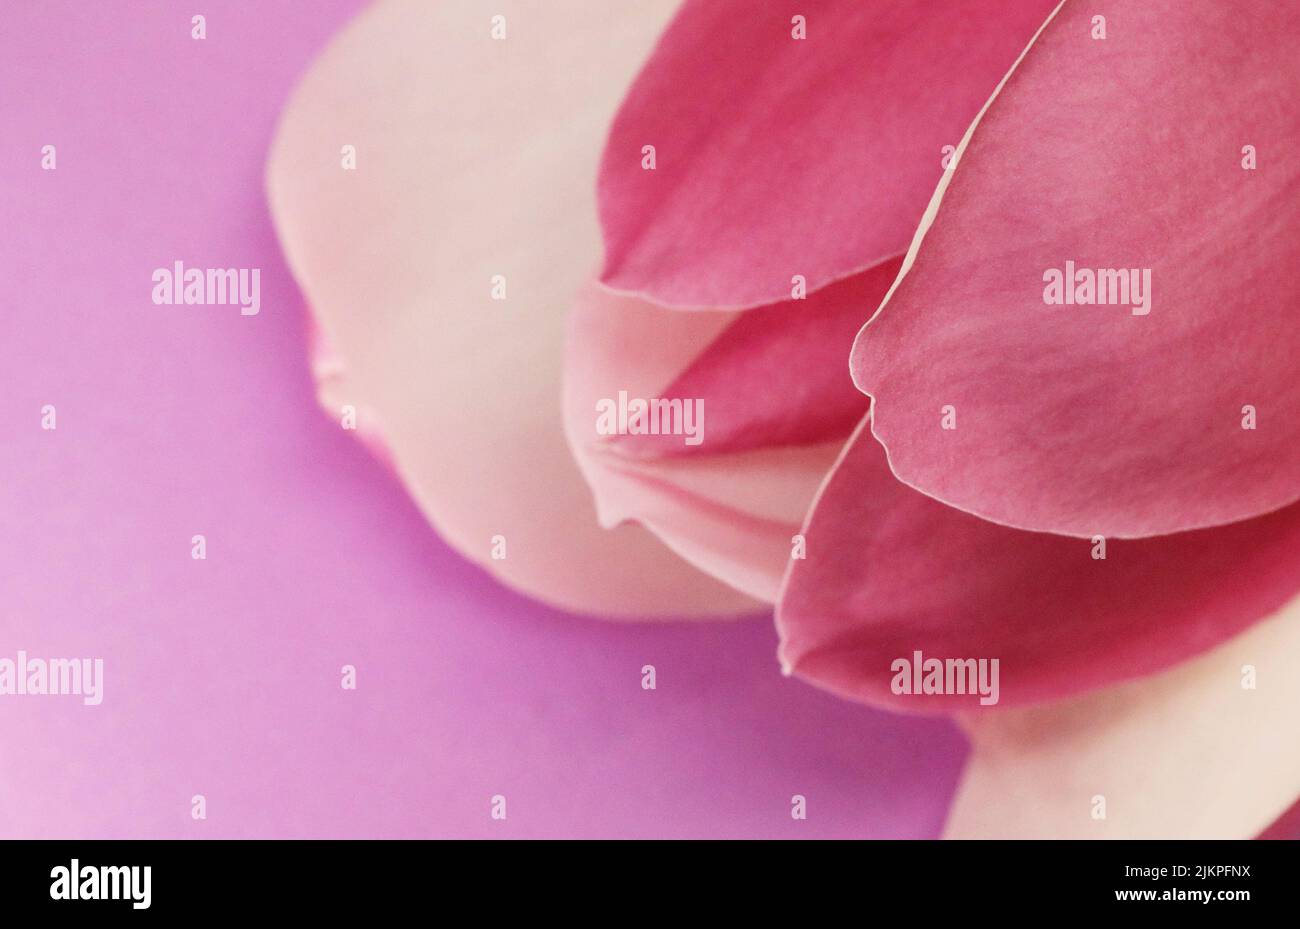 Natures beautiful pink Magnolia flower and petal isolated against a purple or magenta background Stock Photo